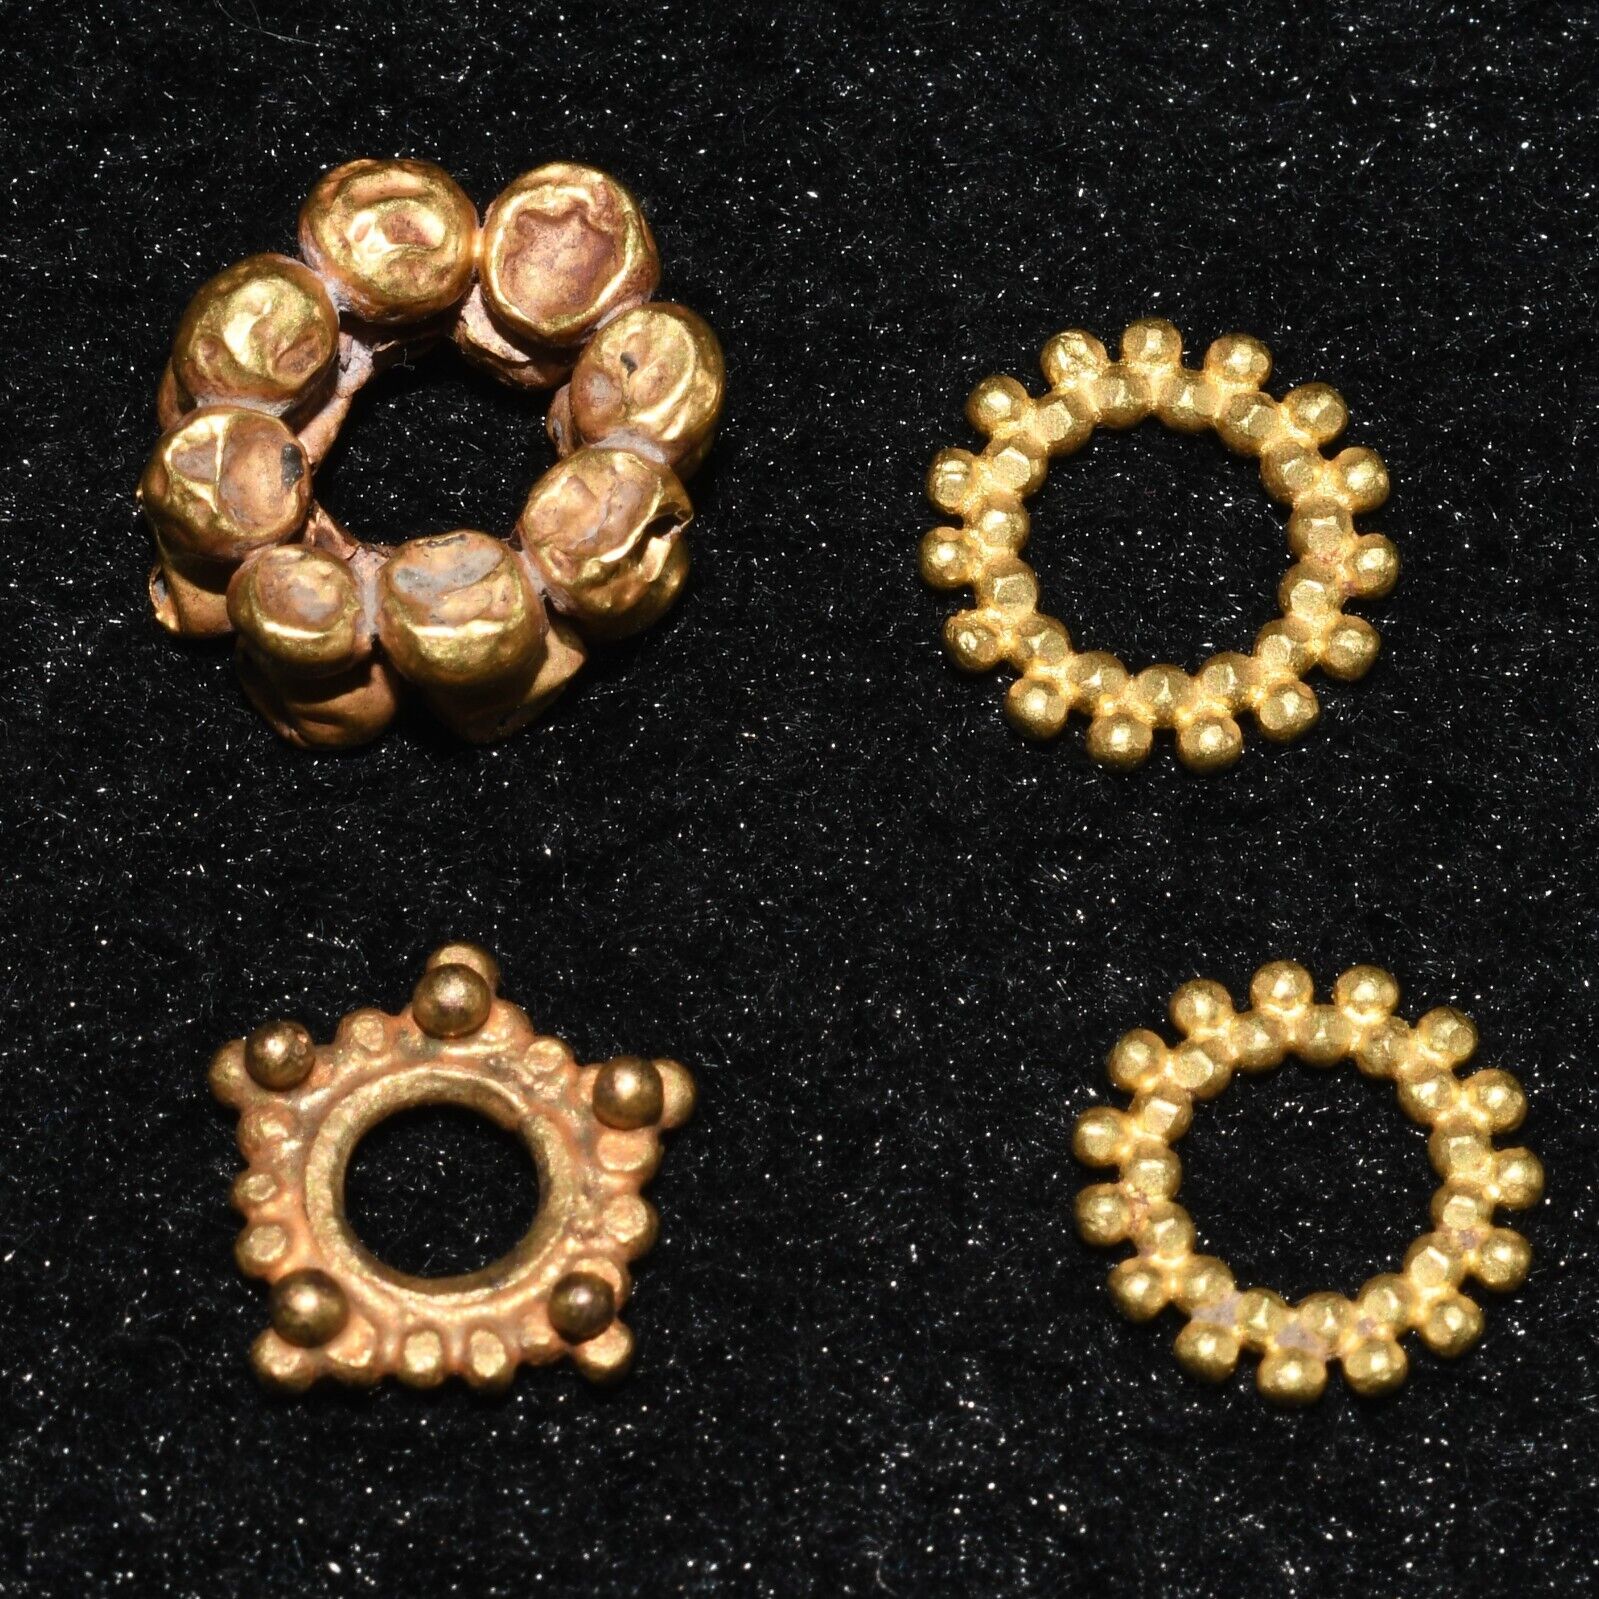 4 Genuine Ancient Roman Solid Gold Beads with Flower Pattern 1st-2nd Century AD